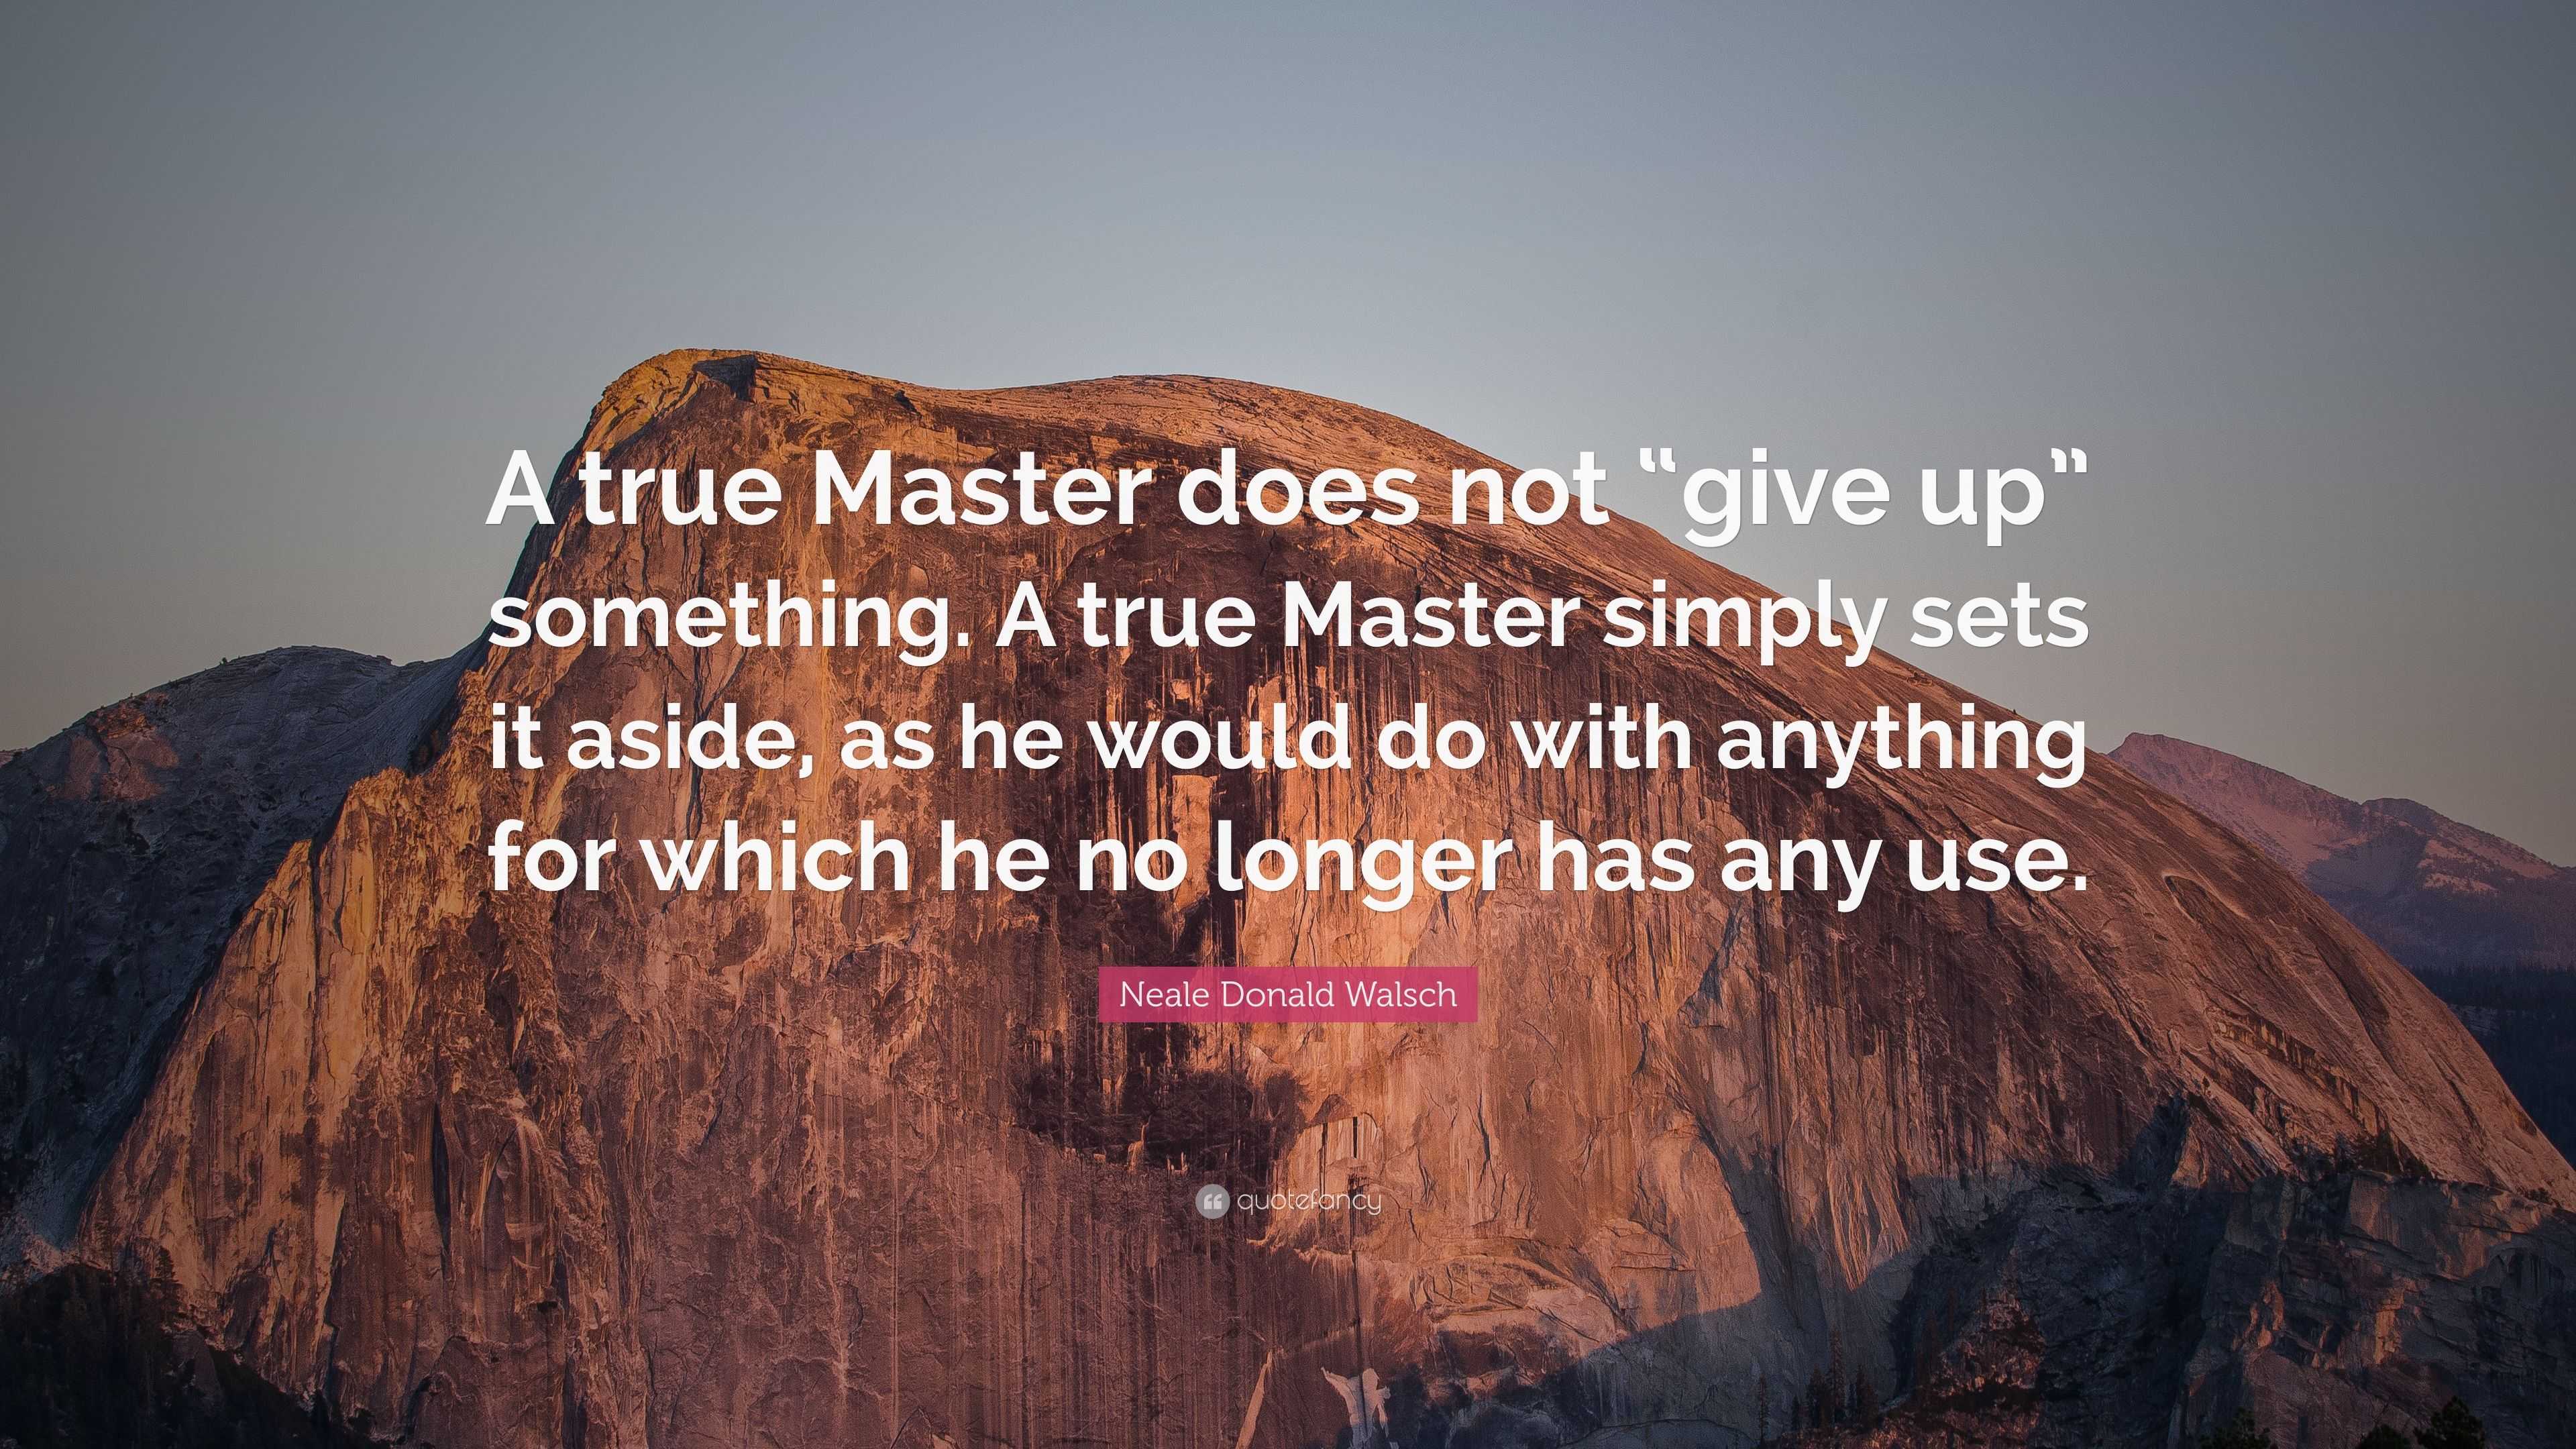 Neale Donald Walsch Quote: “A true Master does not “give up” something. A true Master simply sets aside, as he do with anything for which h...”